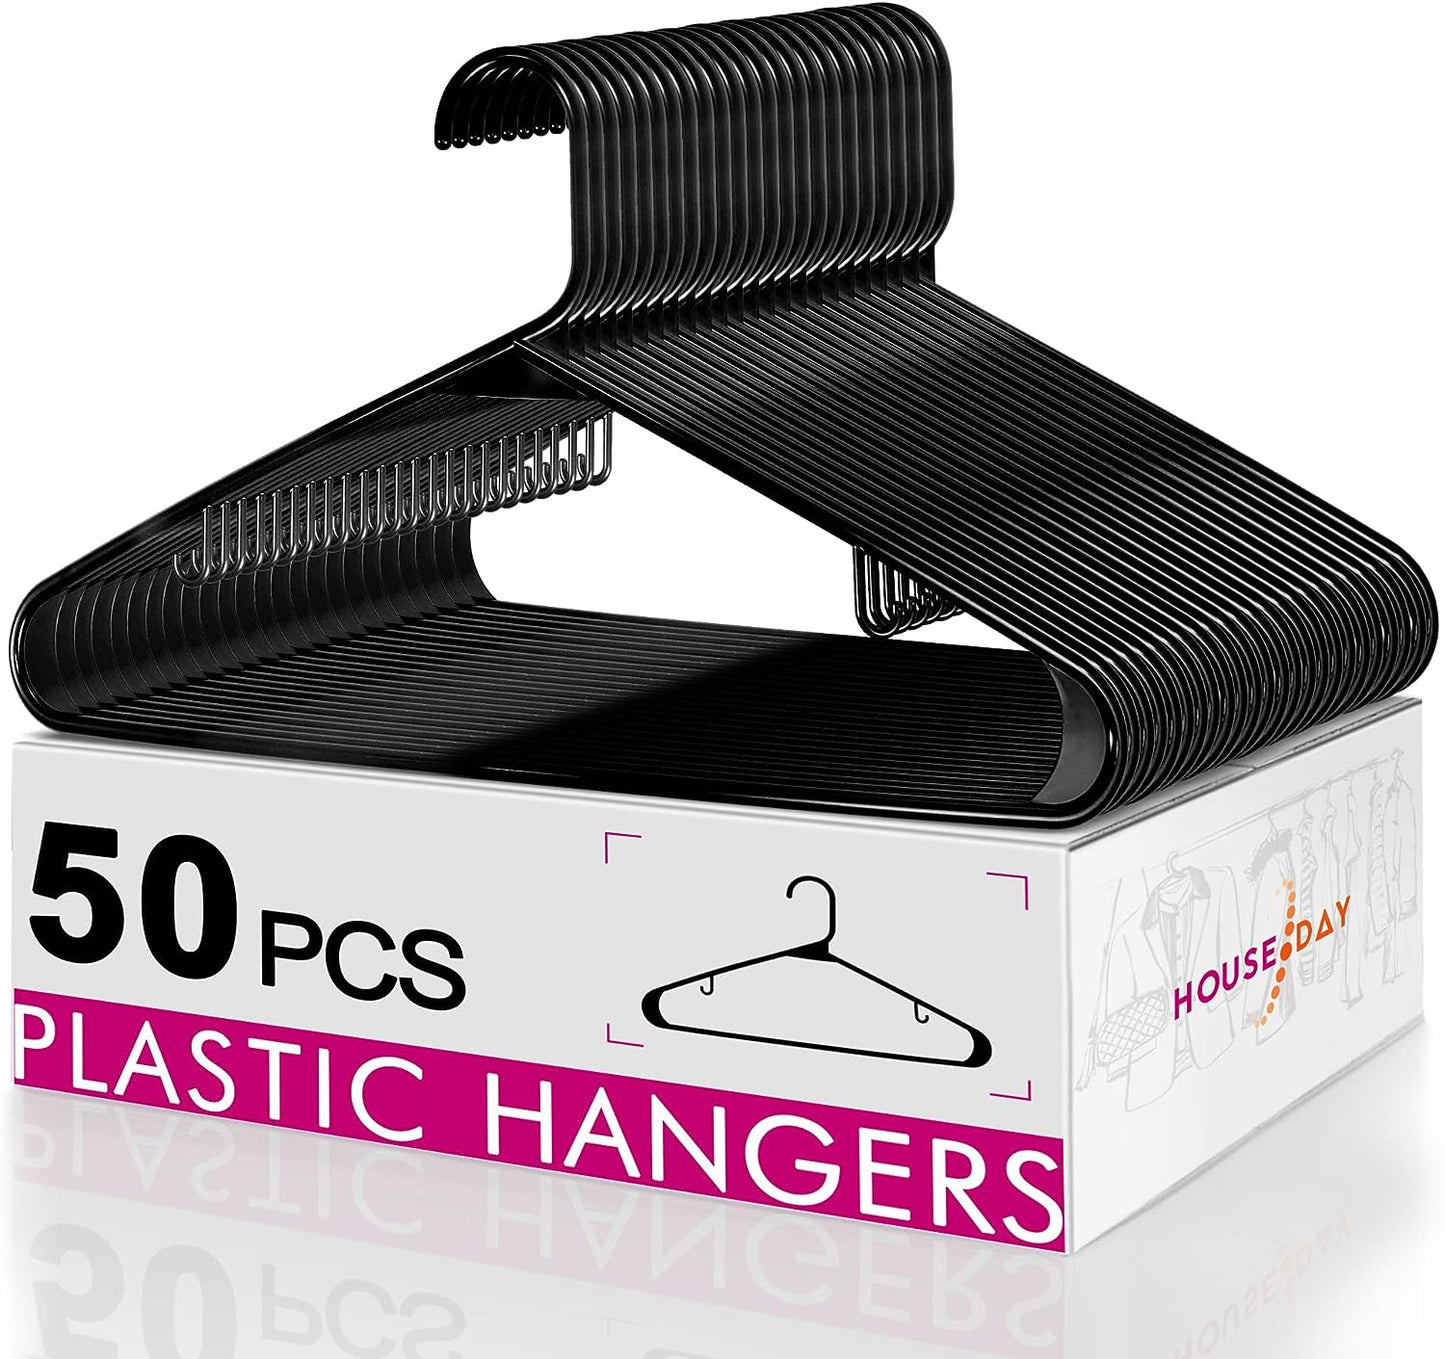 HOUSE DAY 16.5x9.3 Inch Plastic Hangers White 50 Pack